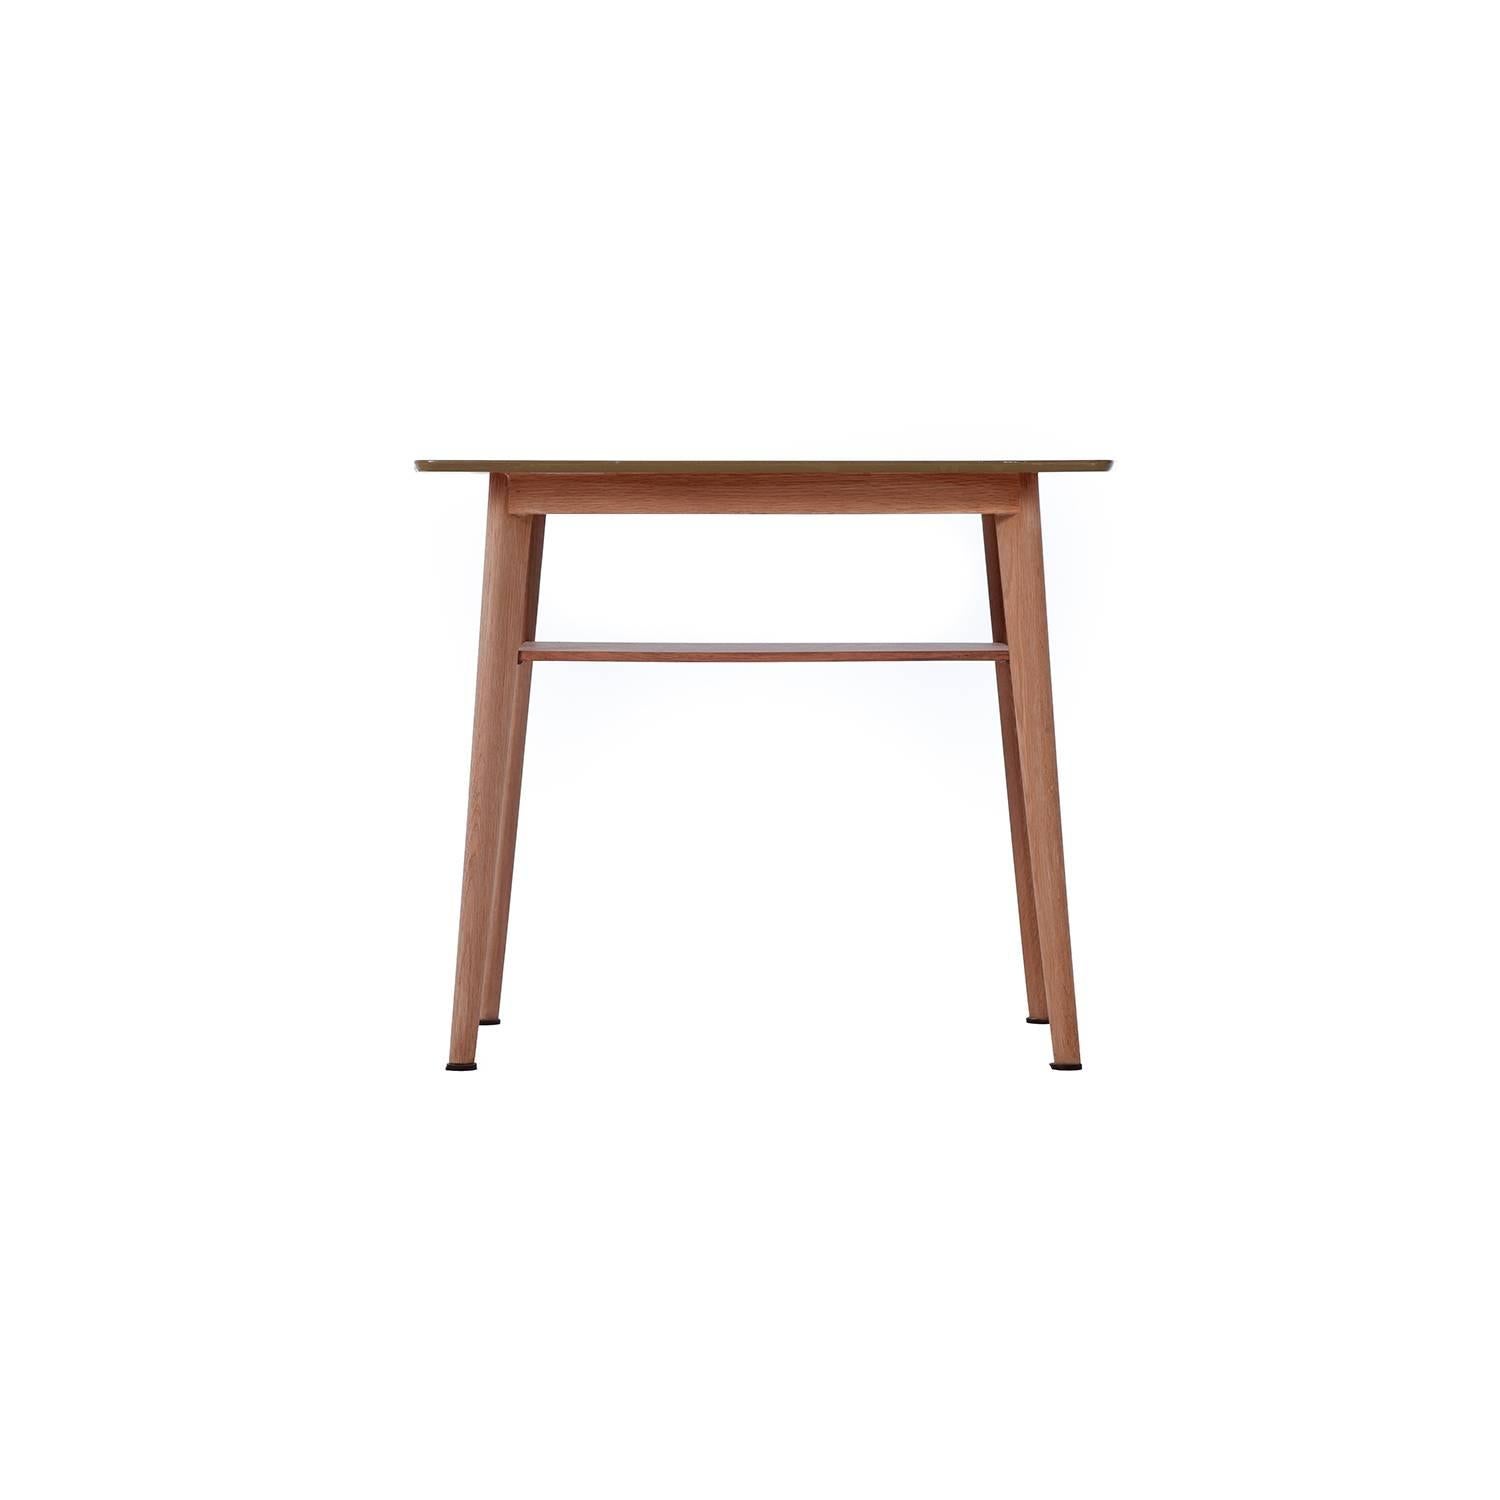 This Danish modern side table features a teak top and shelf offset by oak legs.